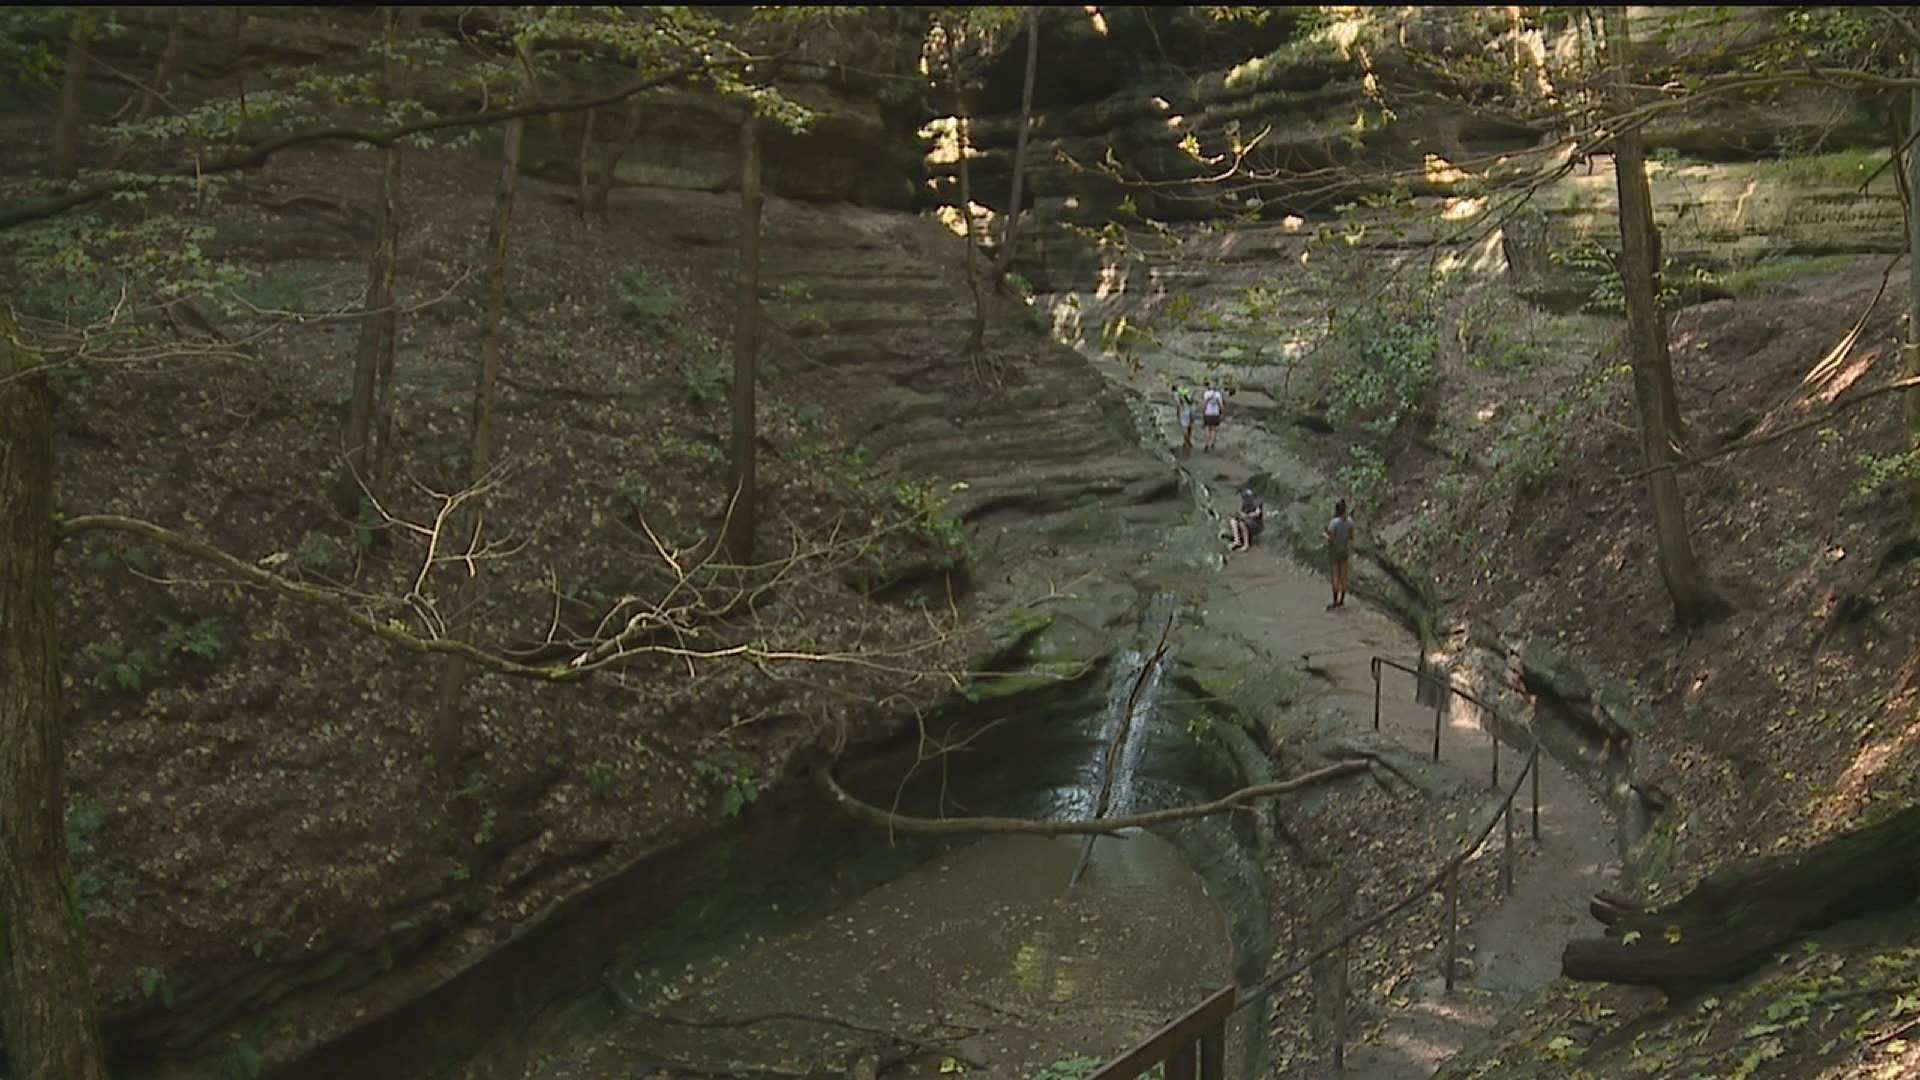 Starved Rock Closed due to Severe Weather Damage